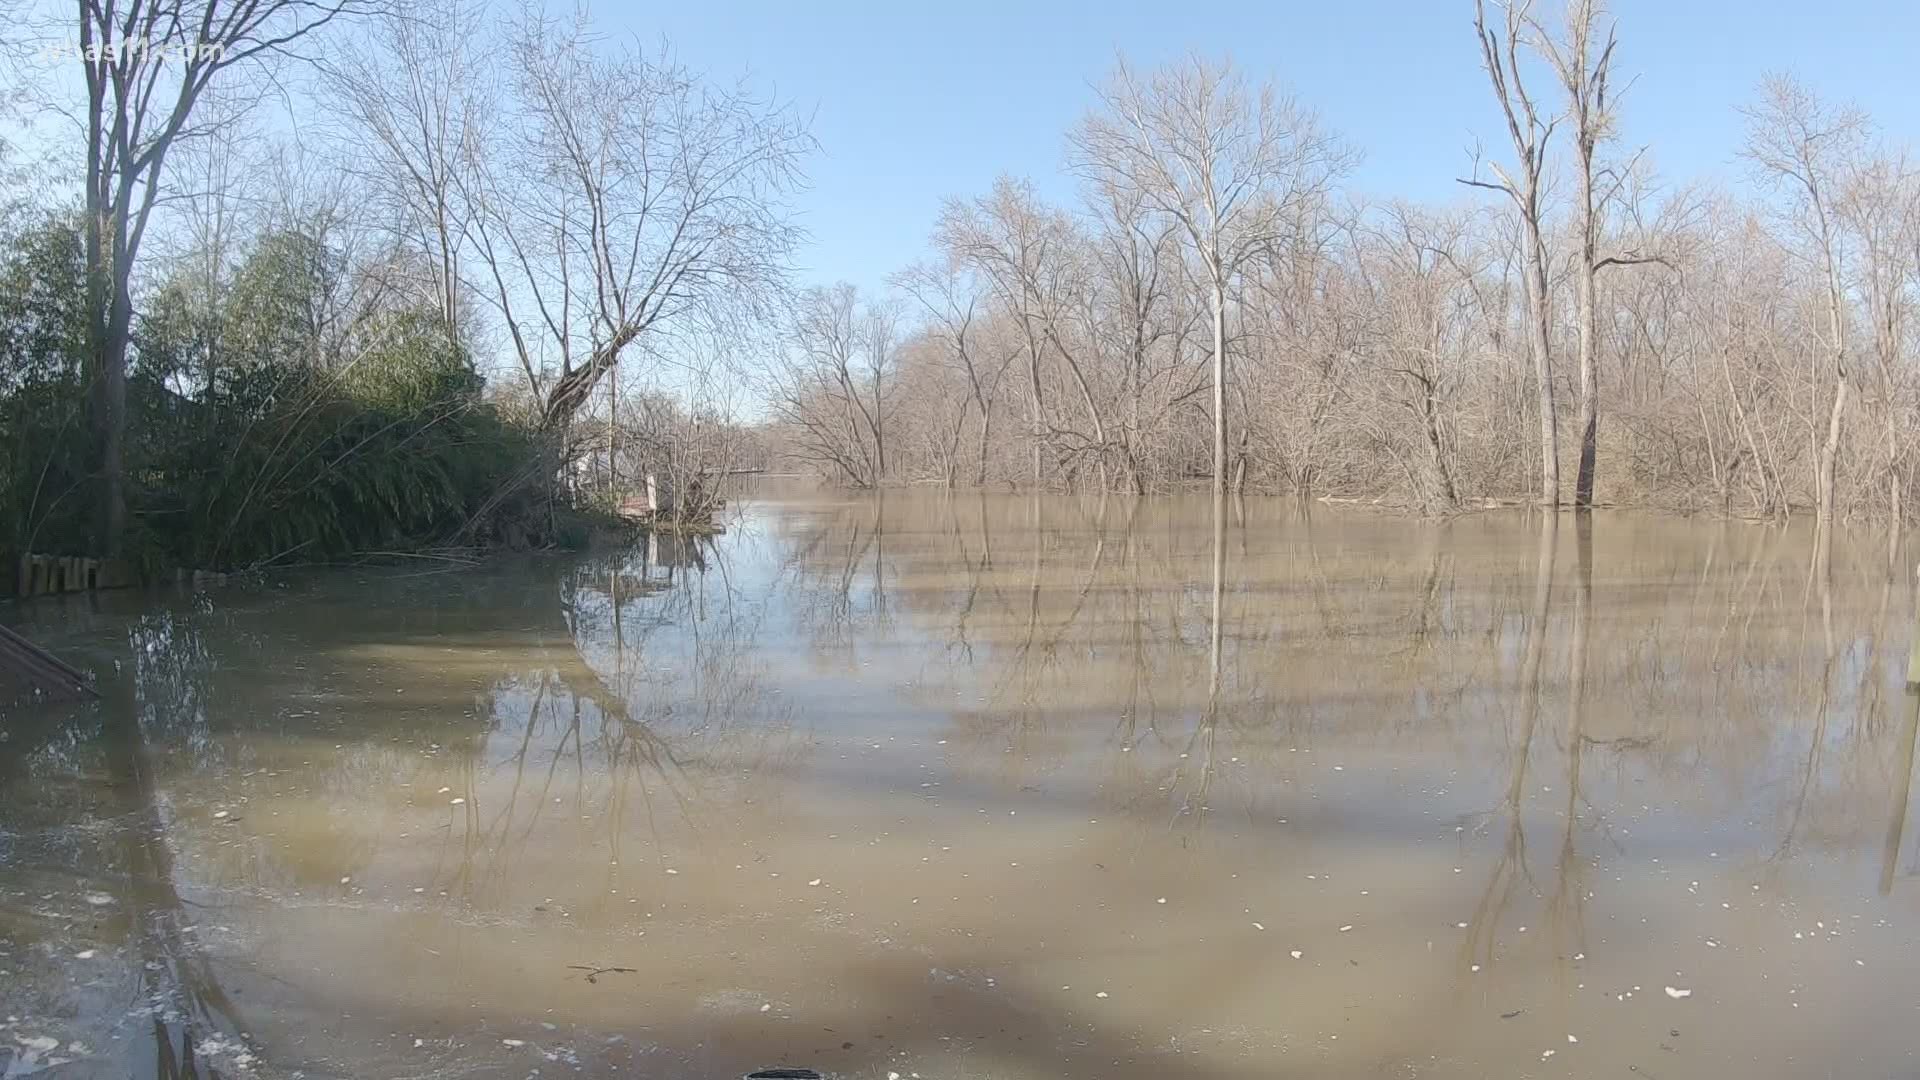 Floodwaters are impacting the area on both sides of the Ohio River. The river is expected to crest sometime this weekend.